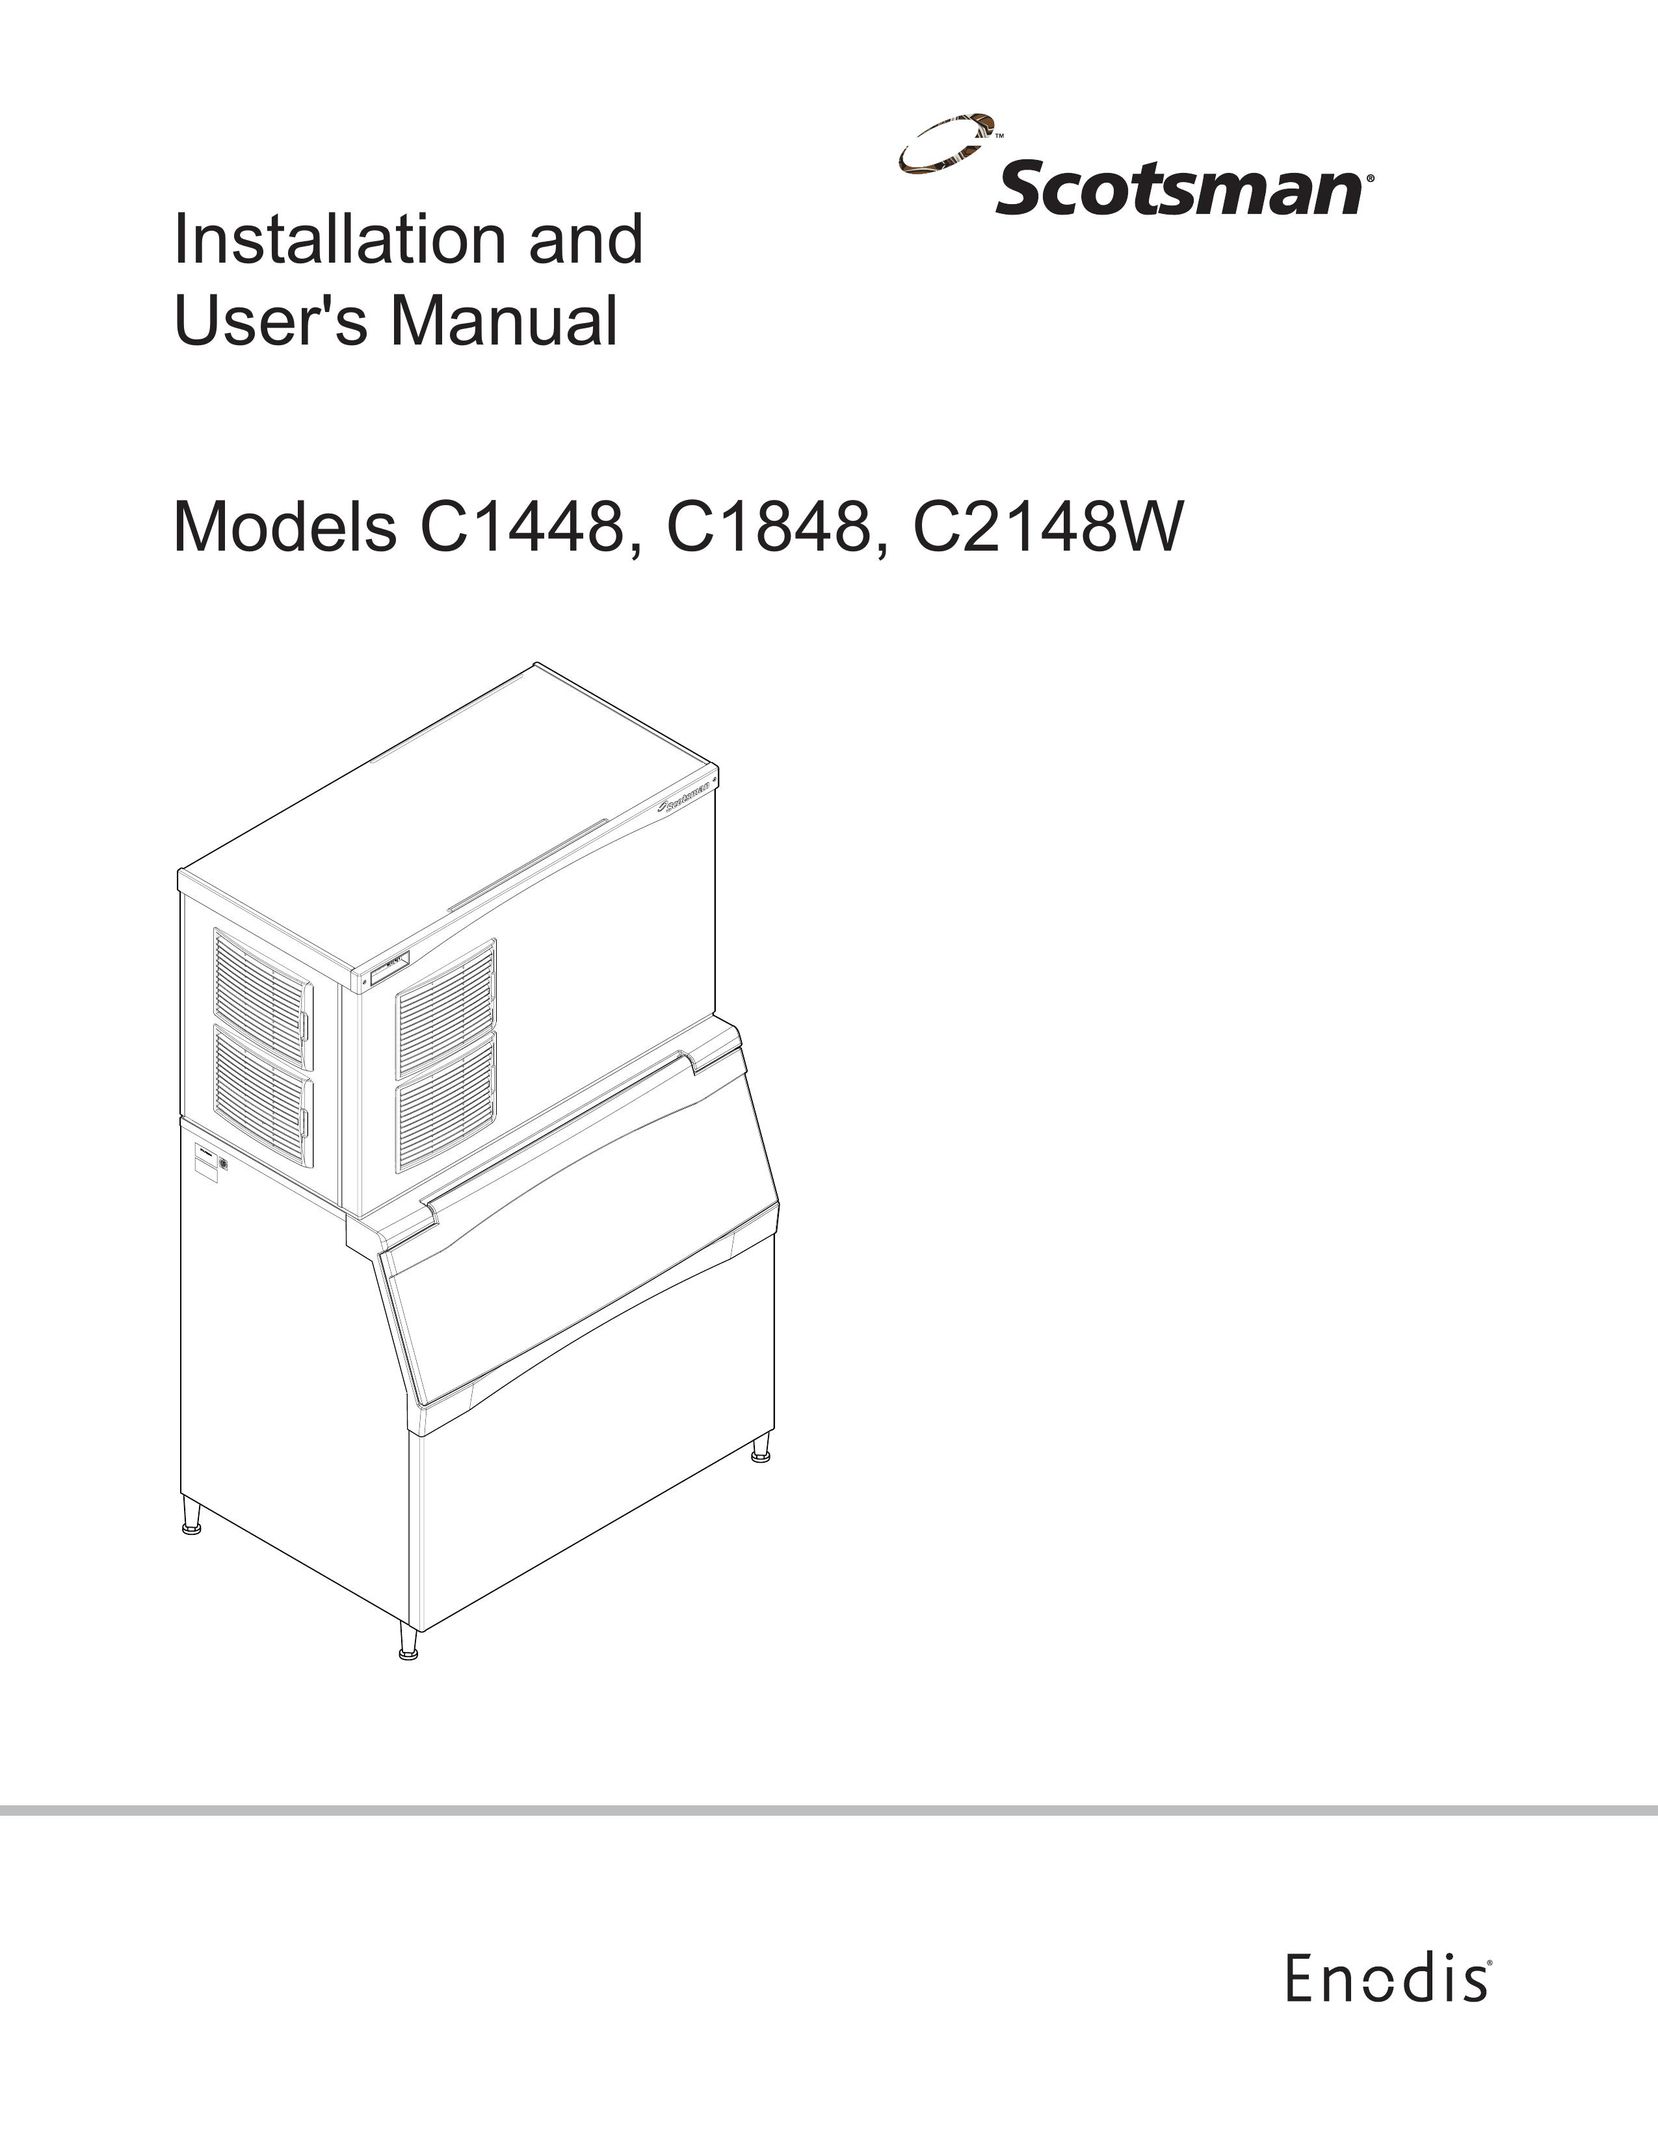 Scotsman Ice C2148W Air Cleaner User Manual